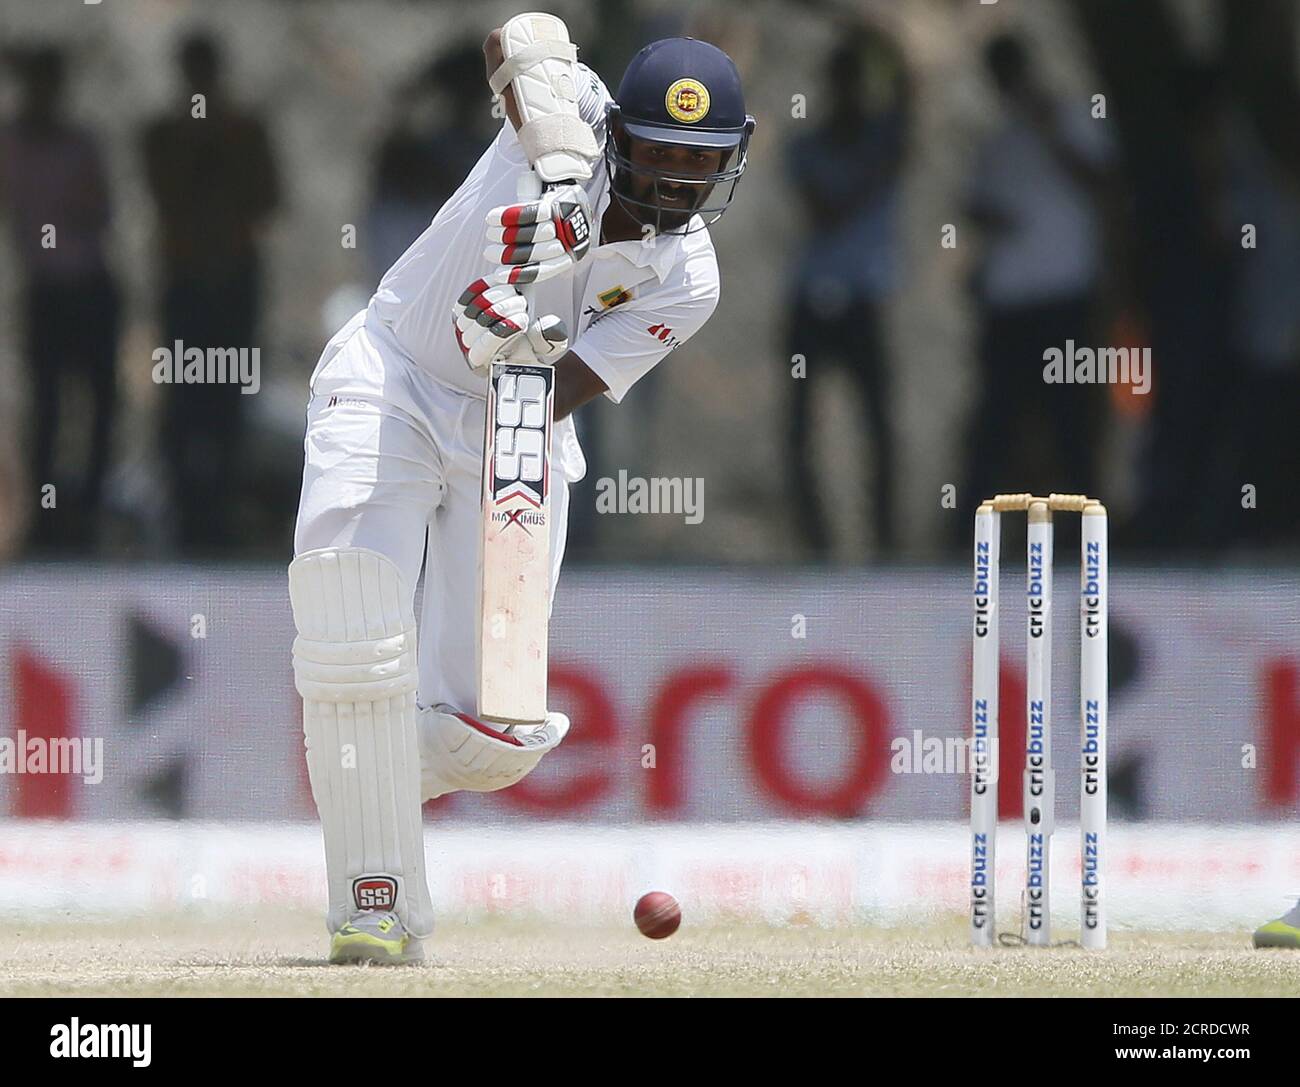 Sri Lanka's Lahiru Thirimanne plays a shot during the third day of their first test cricket match against India in Galle August 14, 2015. REUTERS/Dinuka Liyanawatte Stock Photo